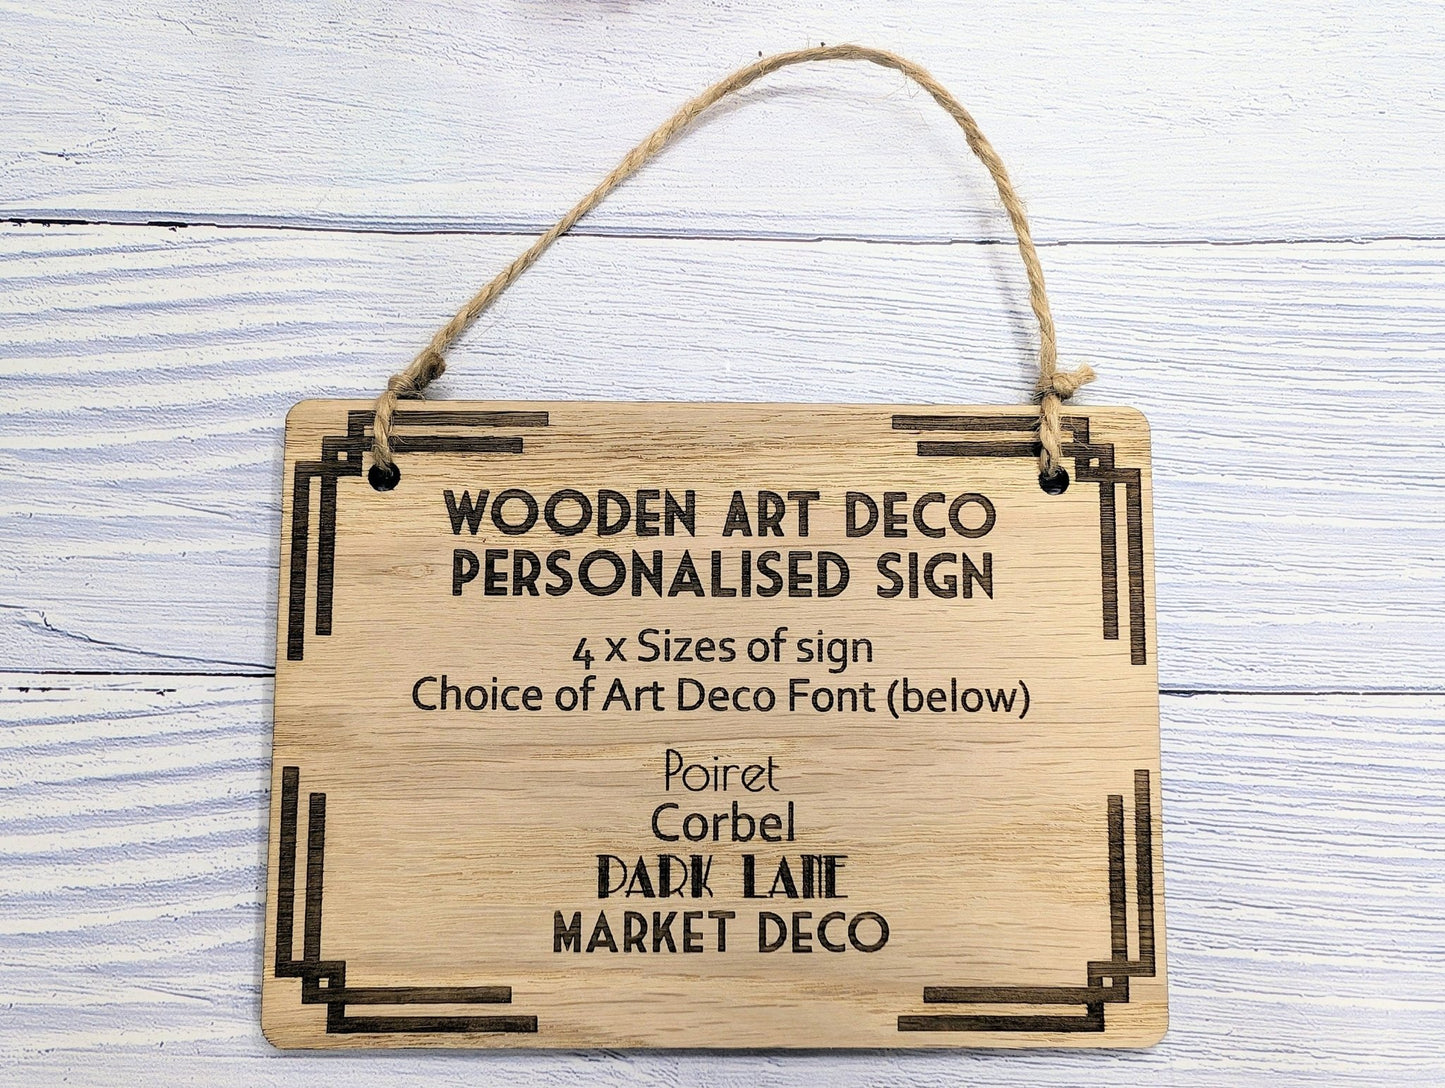 Art Deco Bespoke Text Wooden Sign – Select Your Font & Size | Eco-Friendly | Personalised Wall Decor - Ideal for Home, Office, or Business - CherryGroveCraft